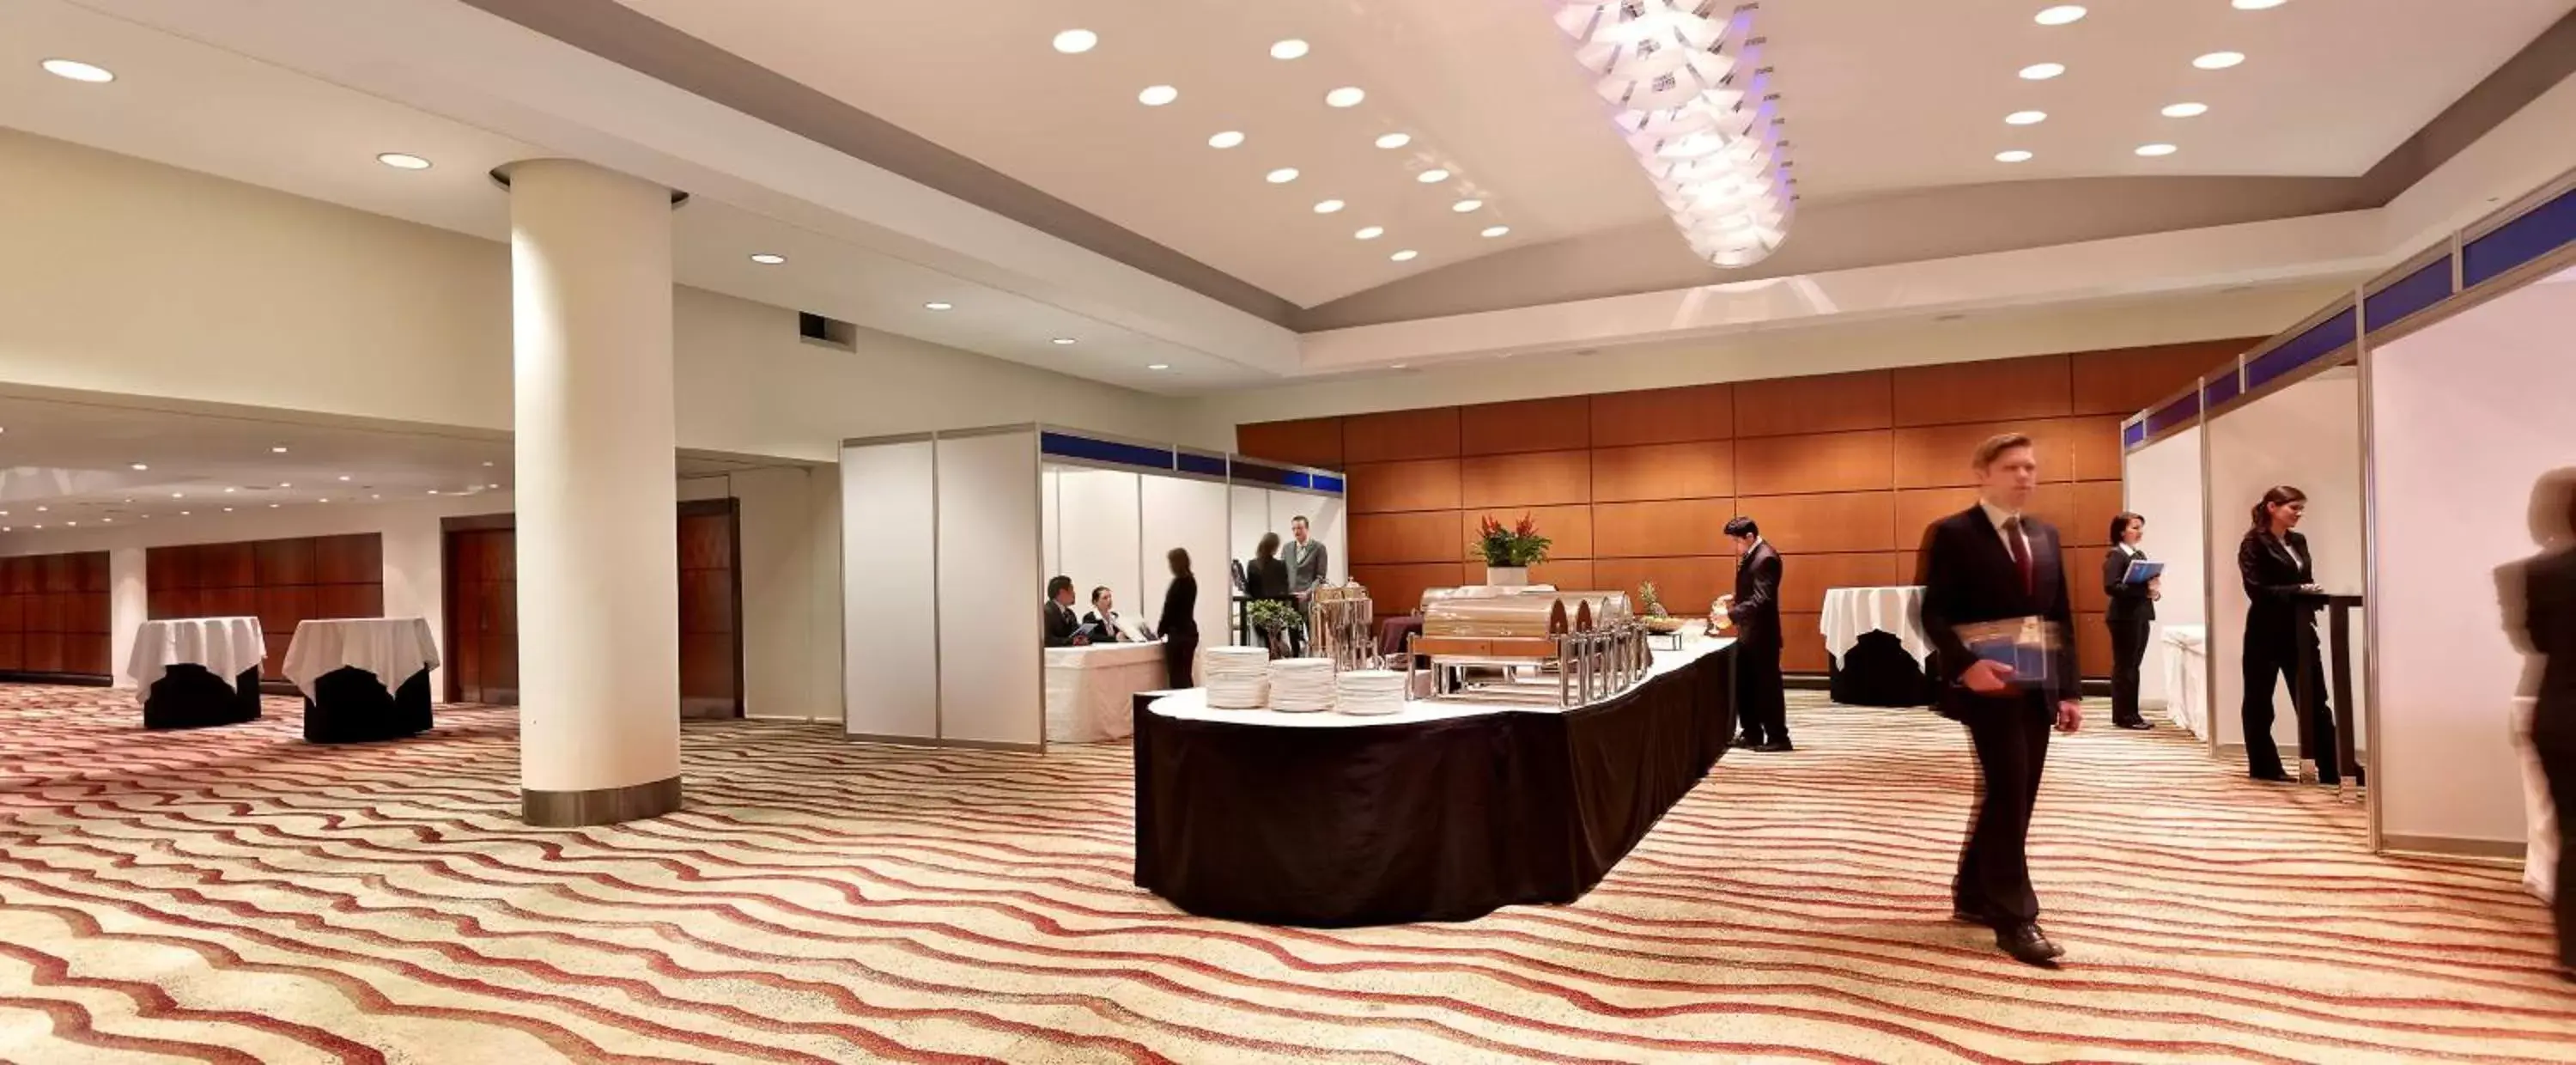 Meeting/conference room in Park Plaza Victoria London